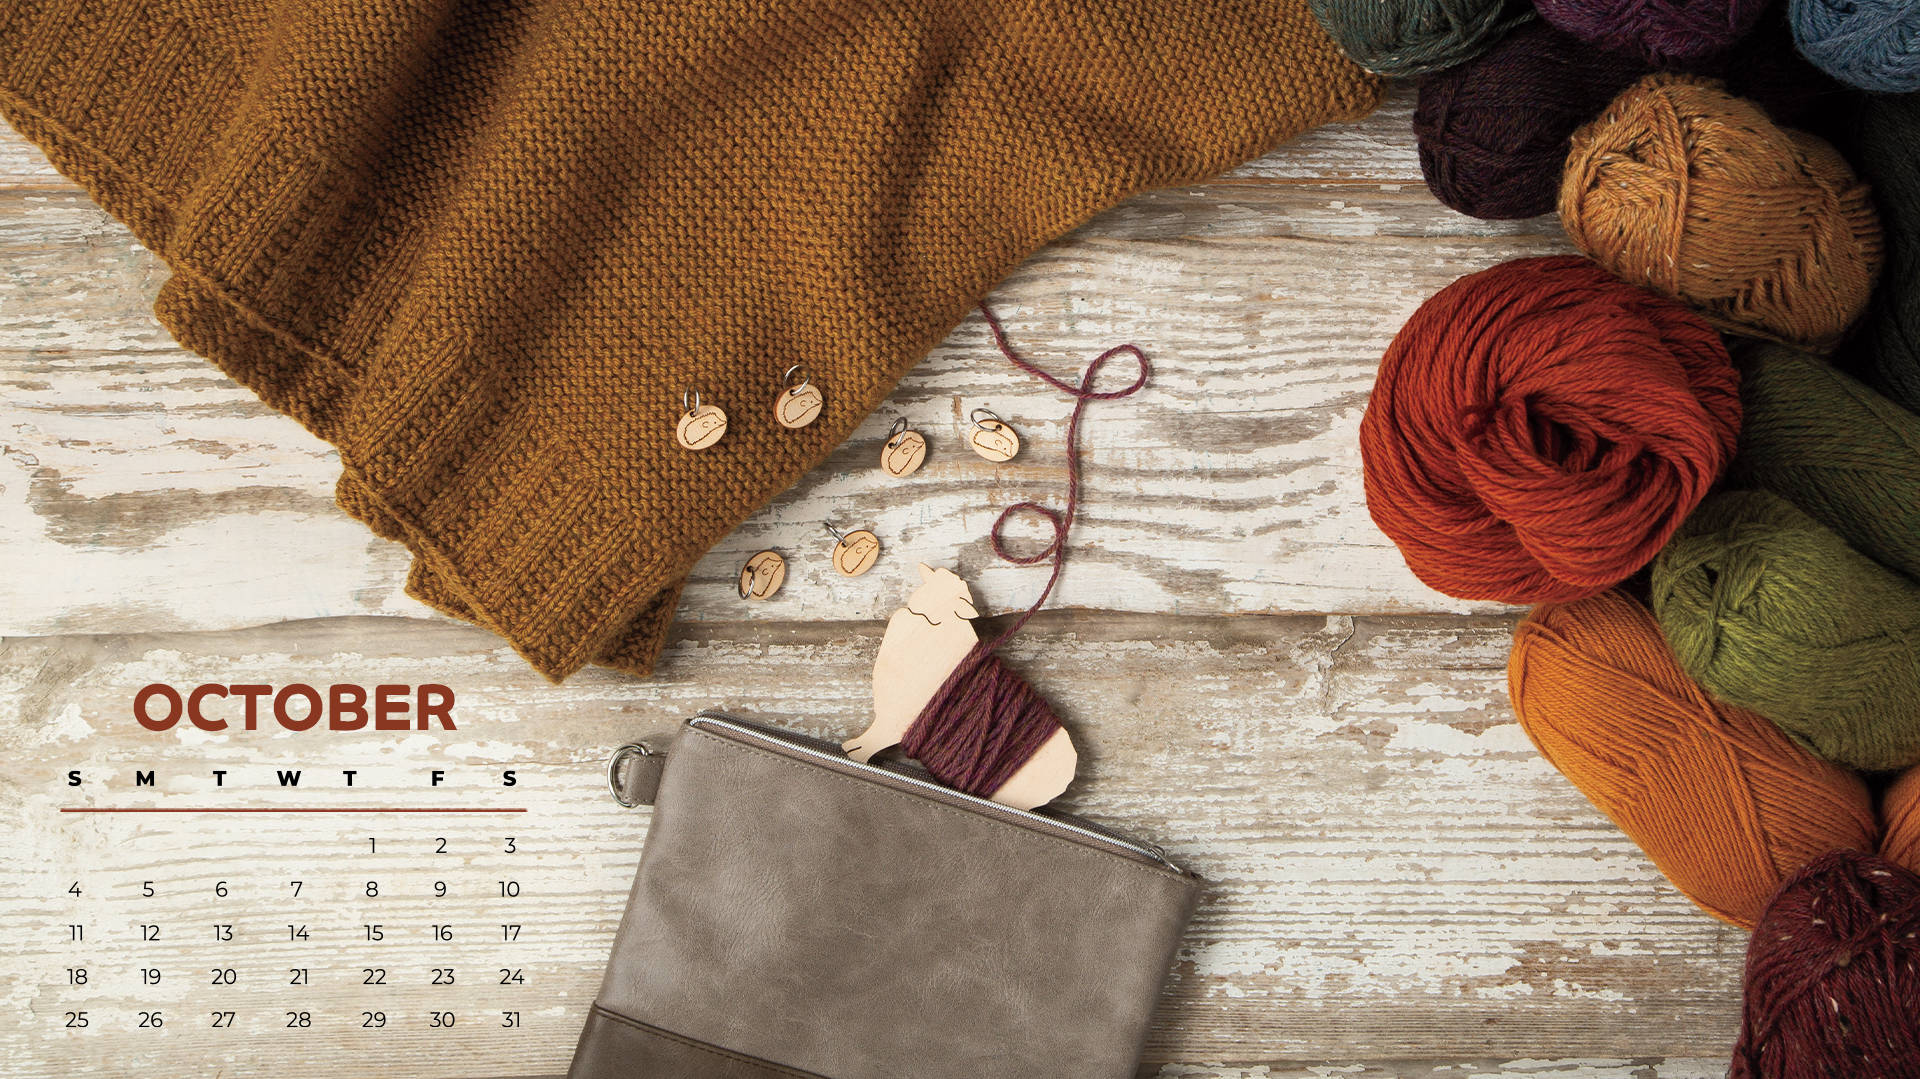 Get Organized for the Month of October with a Free Calendar! Wallpaper